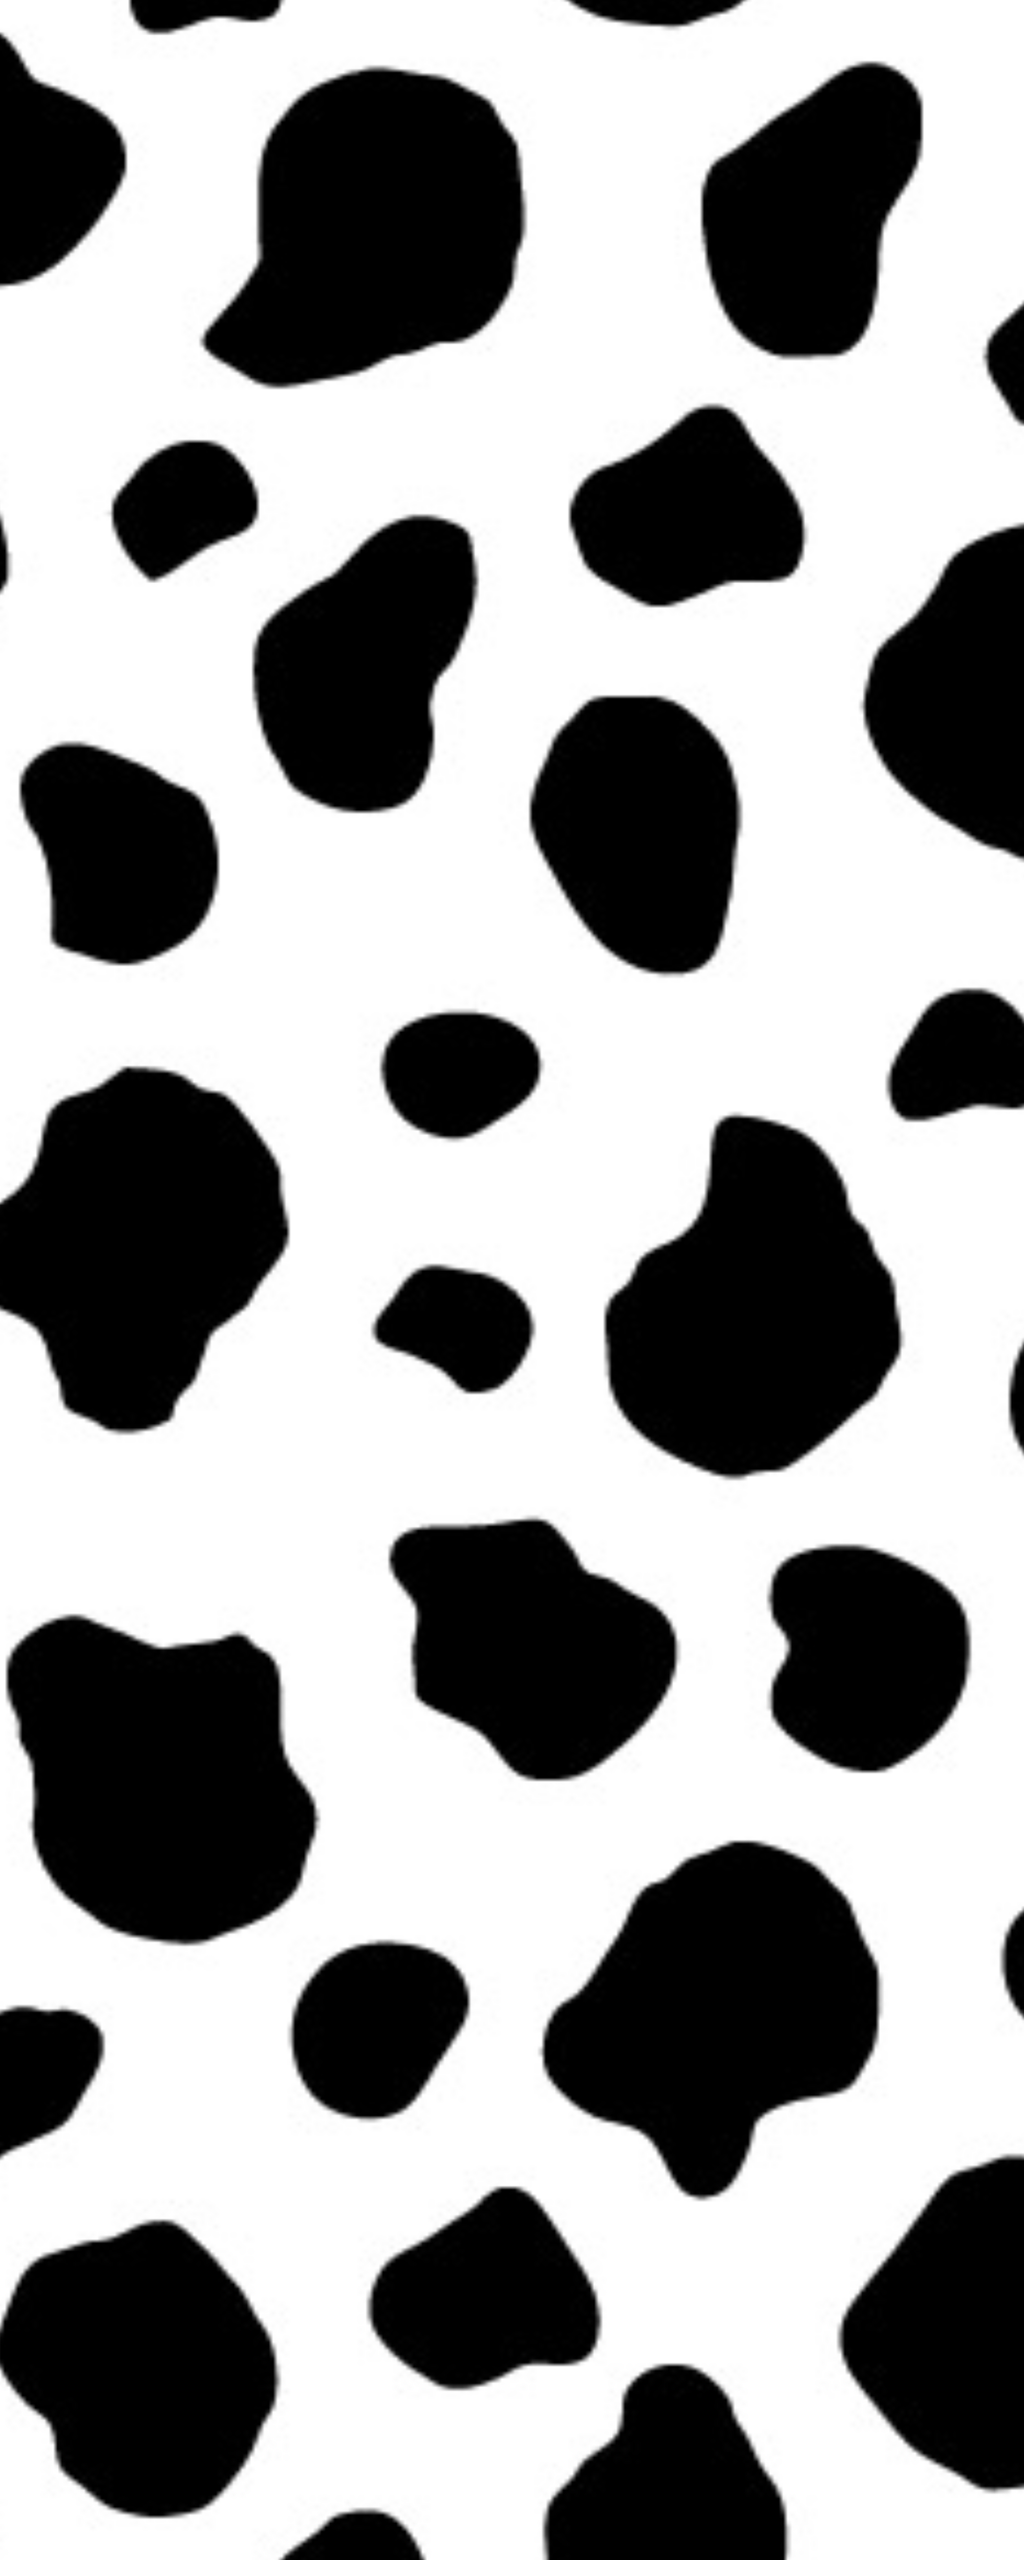 cow print wallpaper by Tiniebells  Download on ZEDGE  94d2